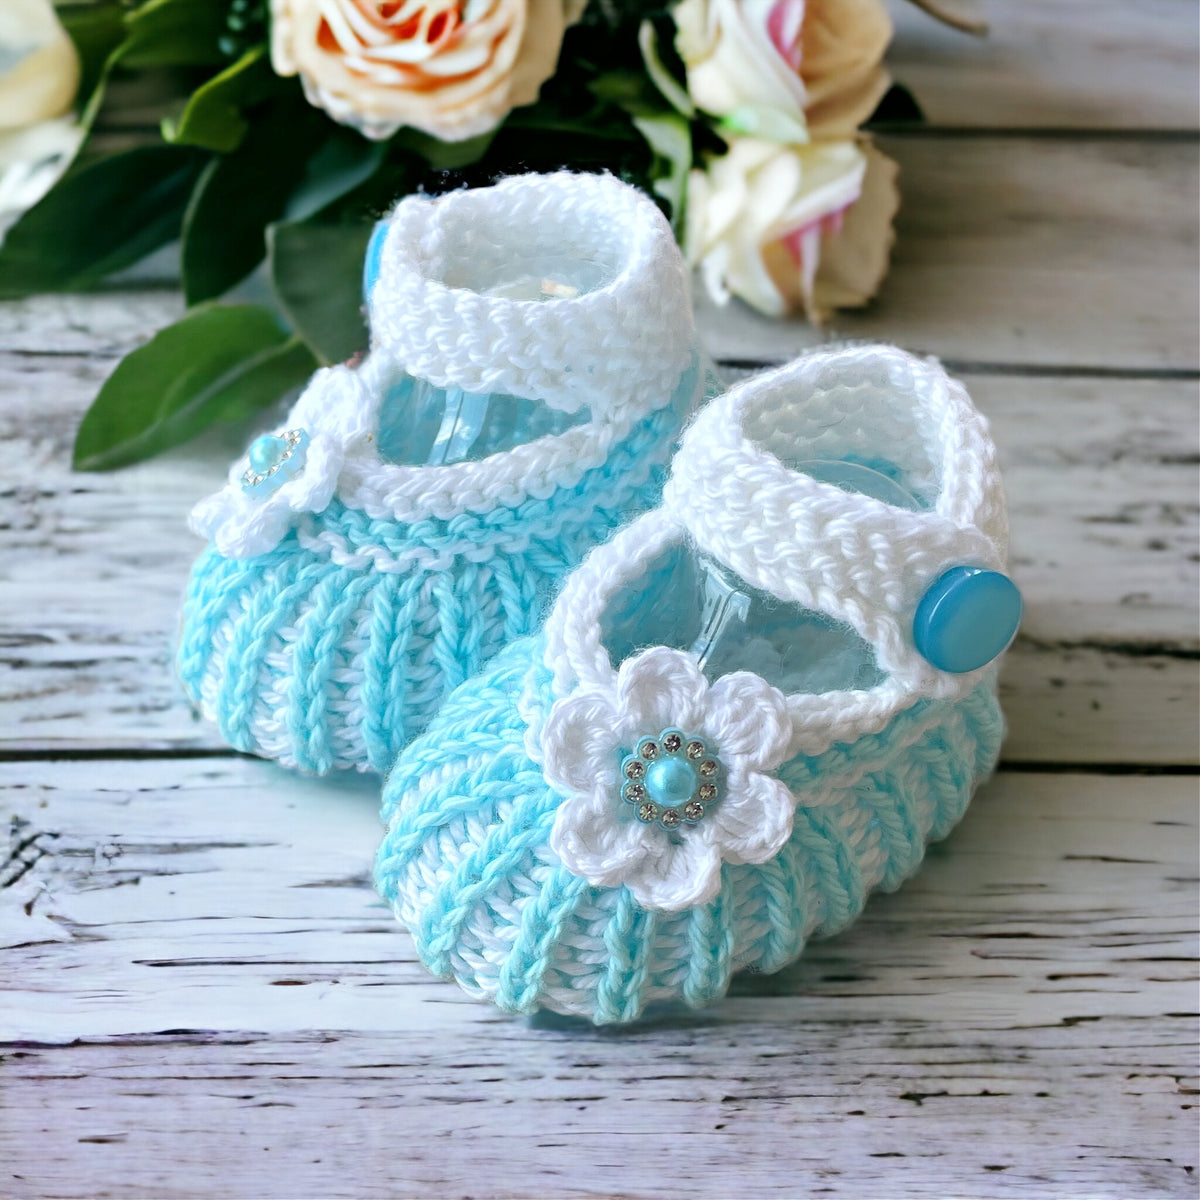 Cotton Knitted Baby Booties in Turquoise and White, Daisy Booties with rhinestones